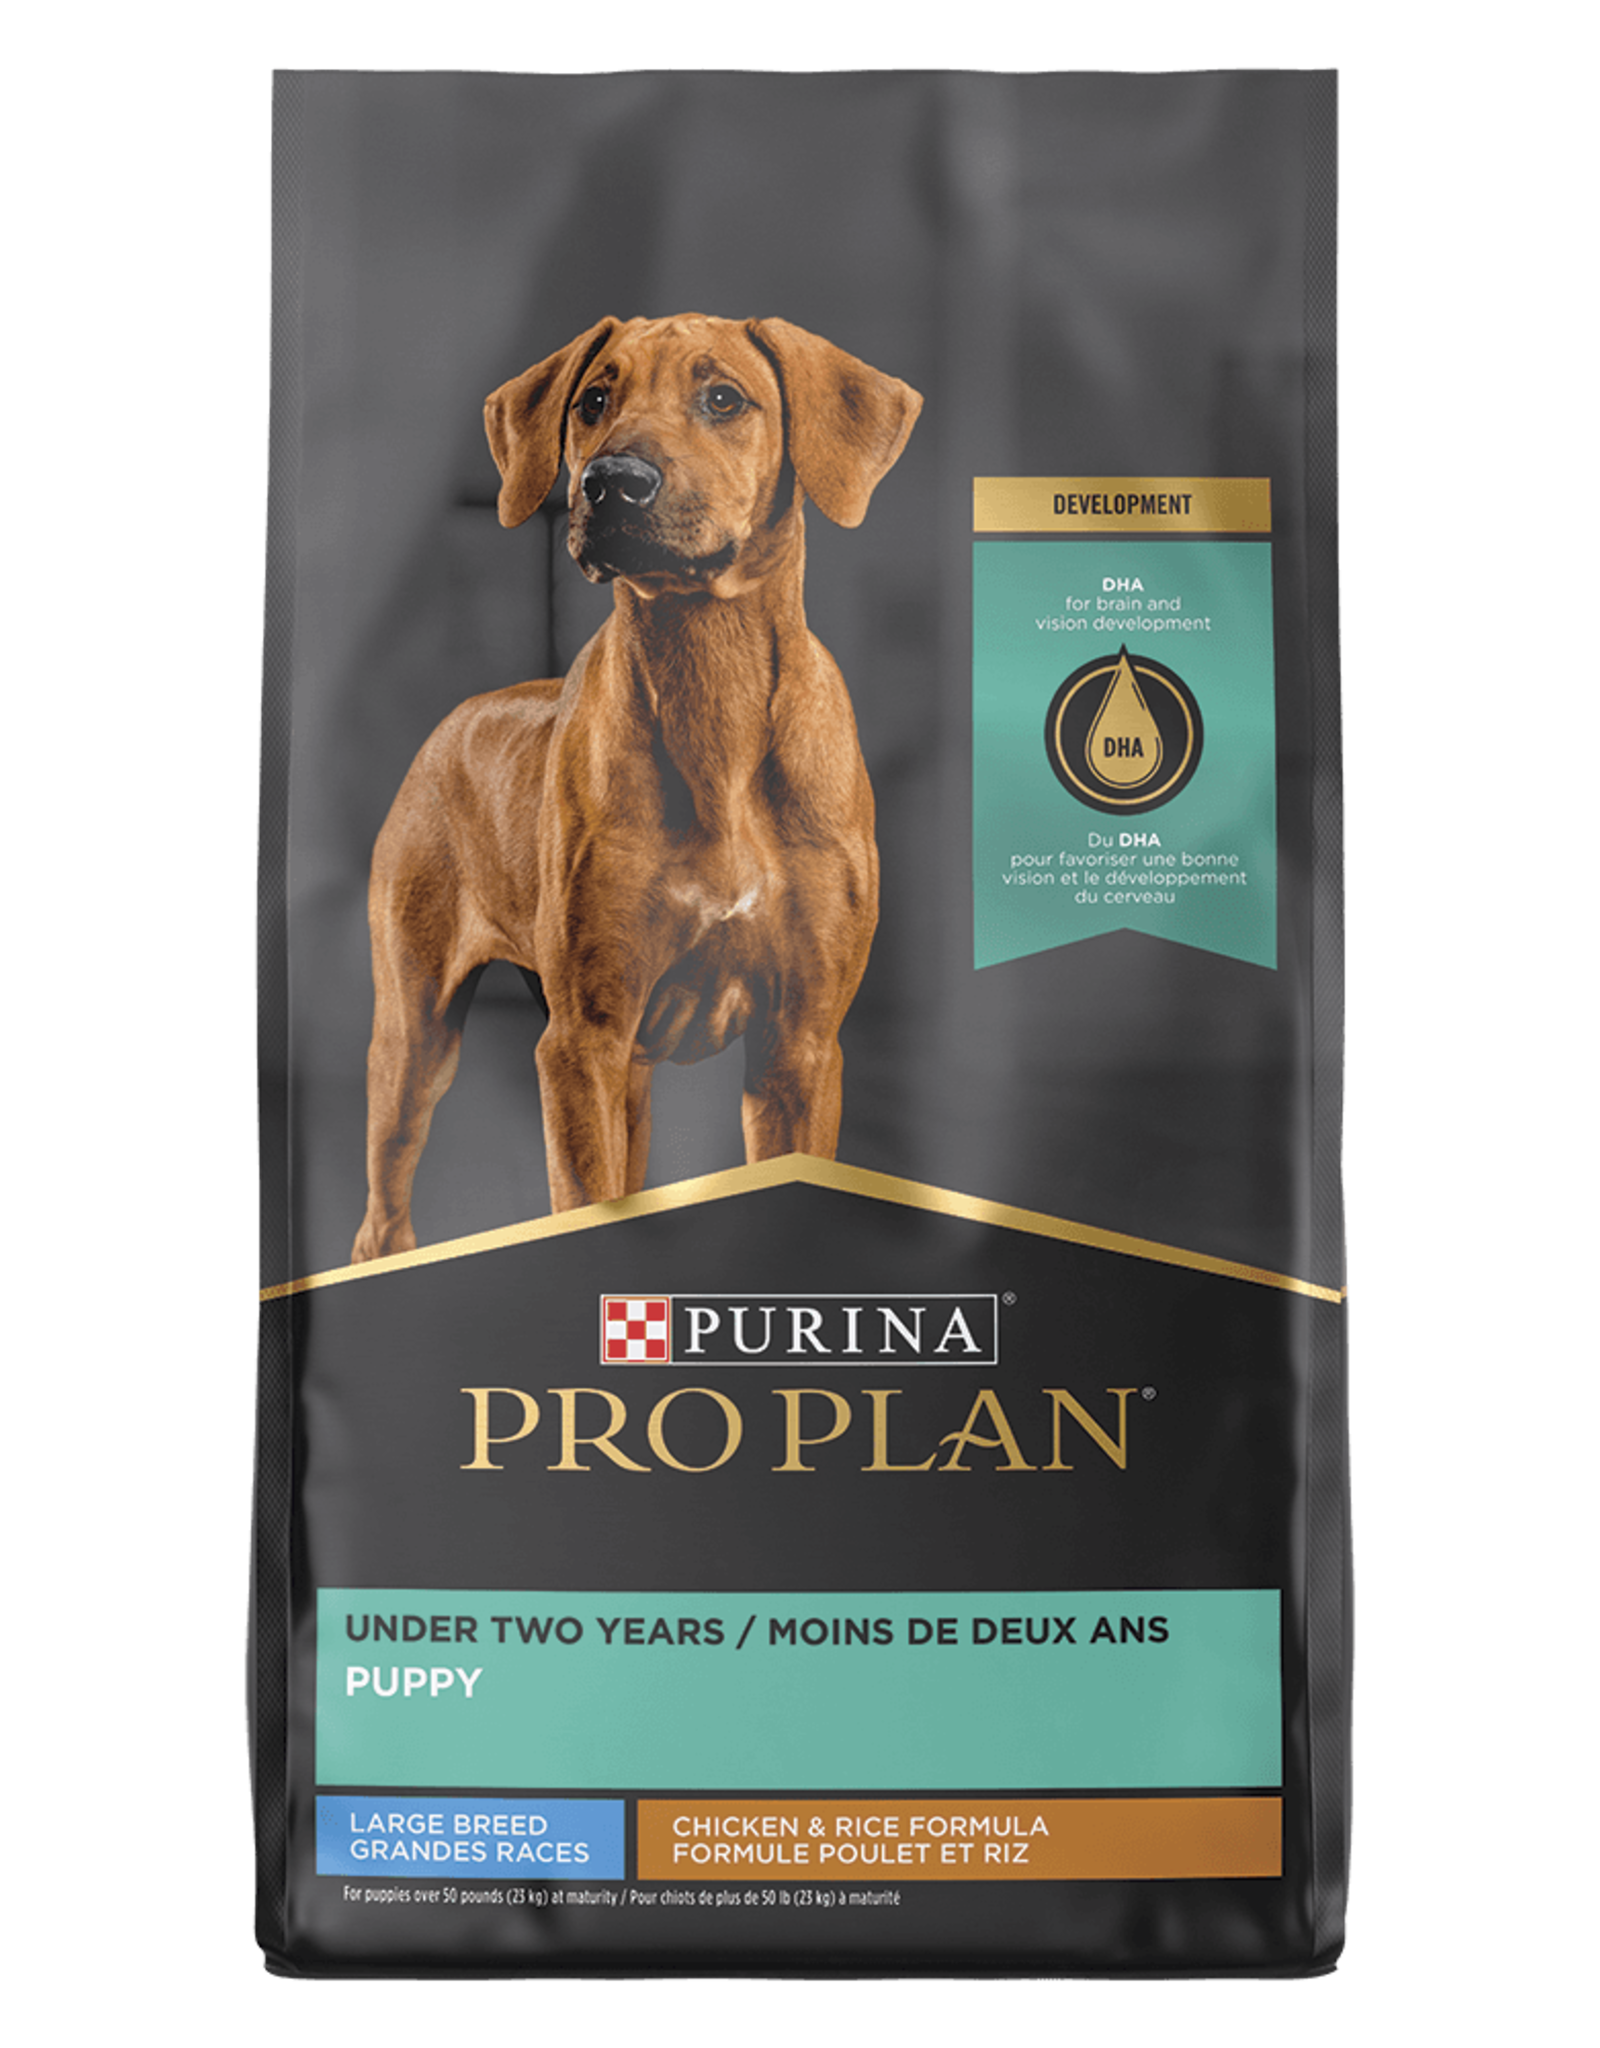 NESTLE PURINA PETCARE PRO PLAN FOCUS PUPPY LARGE BREED 18LBS